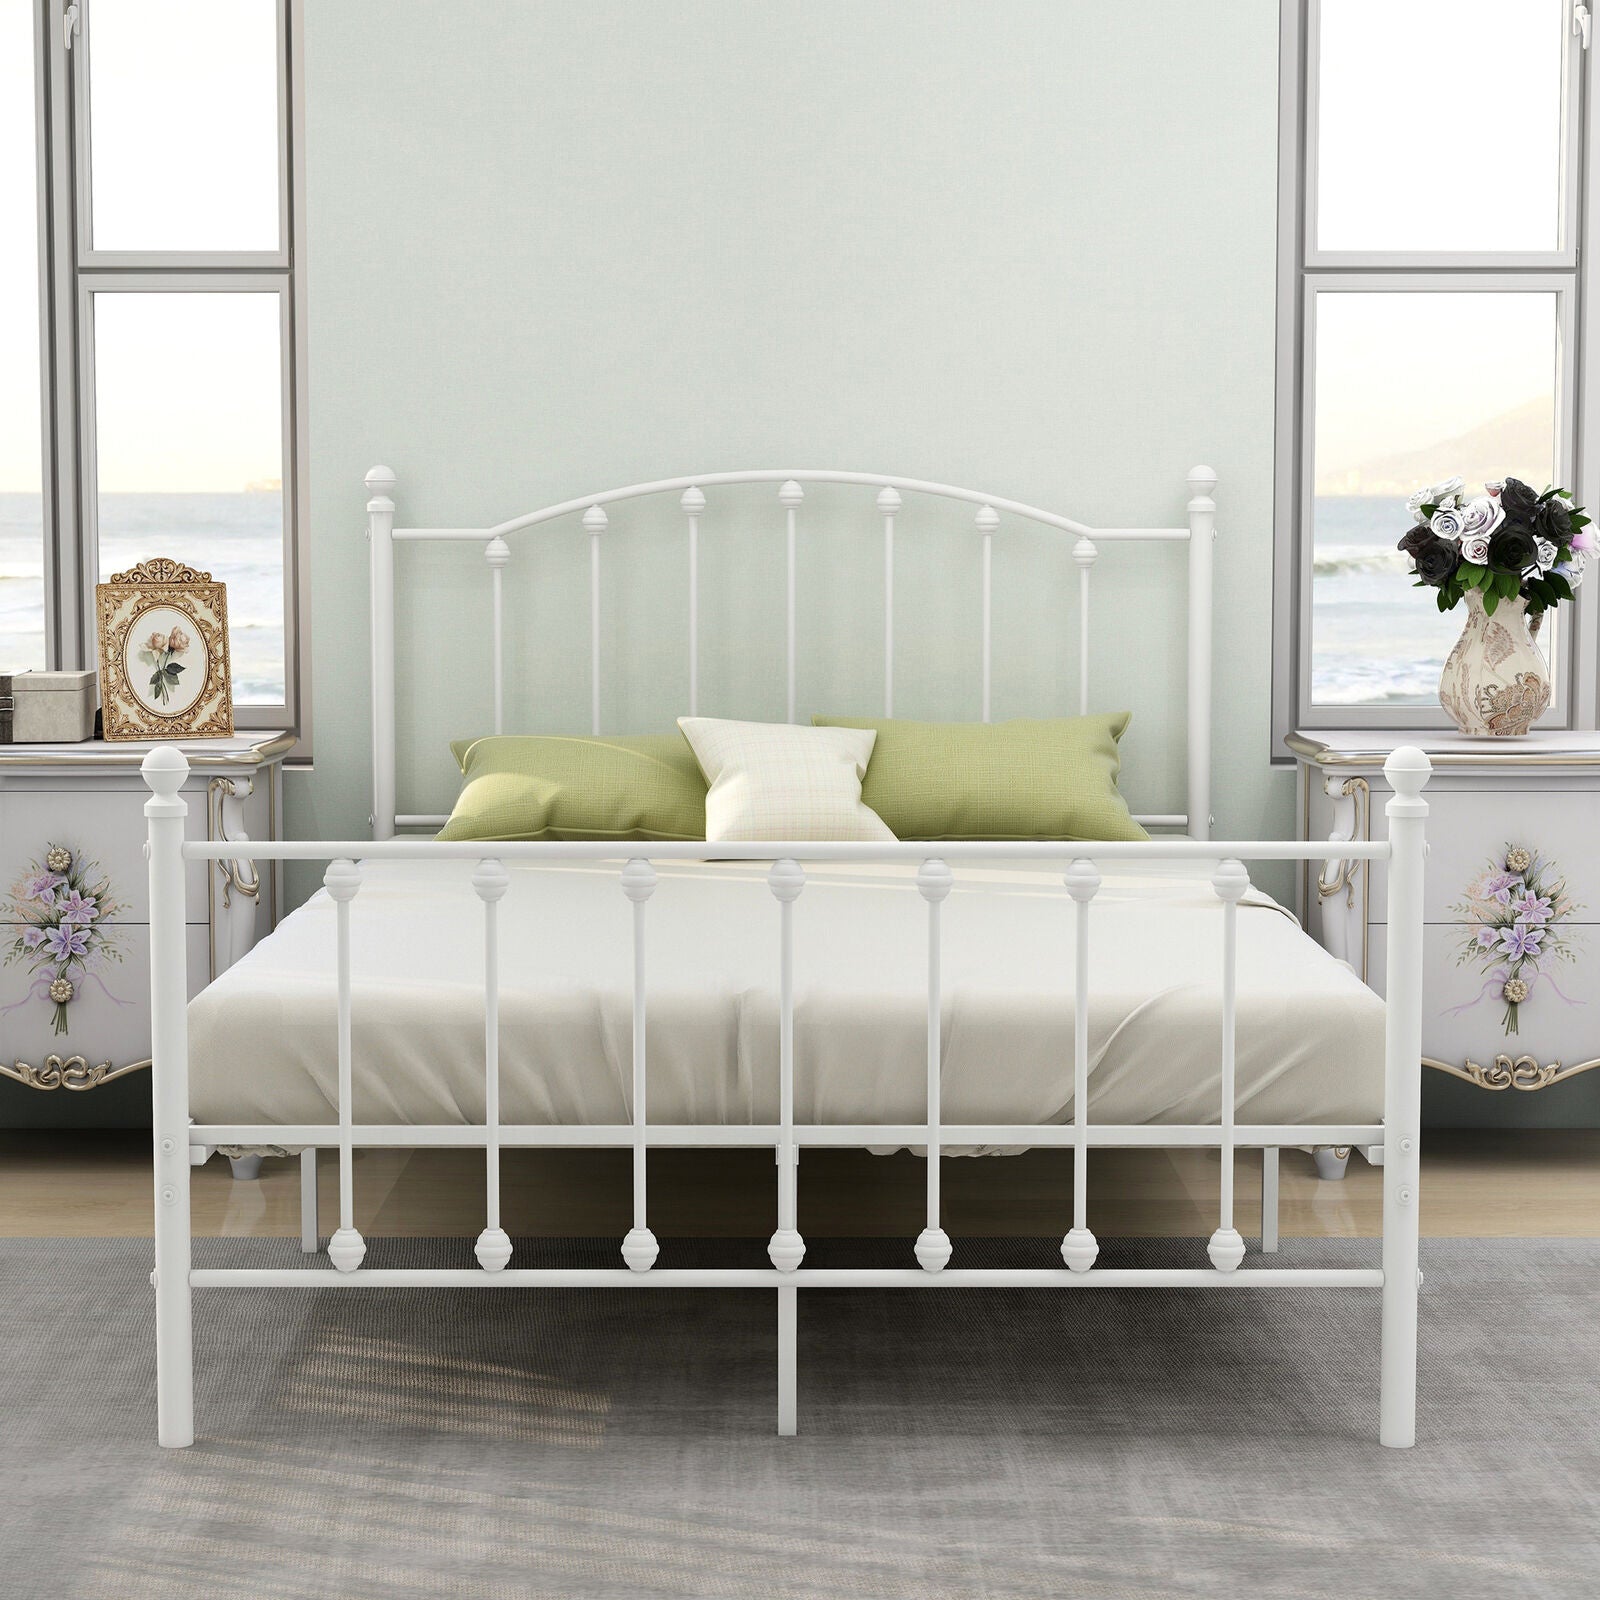 Metal Platform Bed Frame Full Size with Classic Headboard - BLACK  (NC).